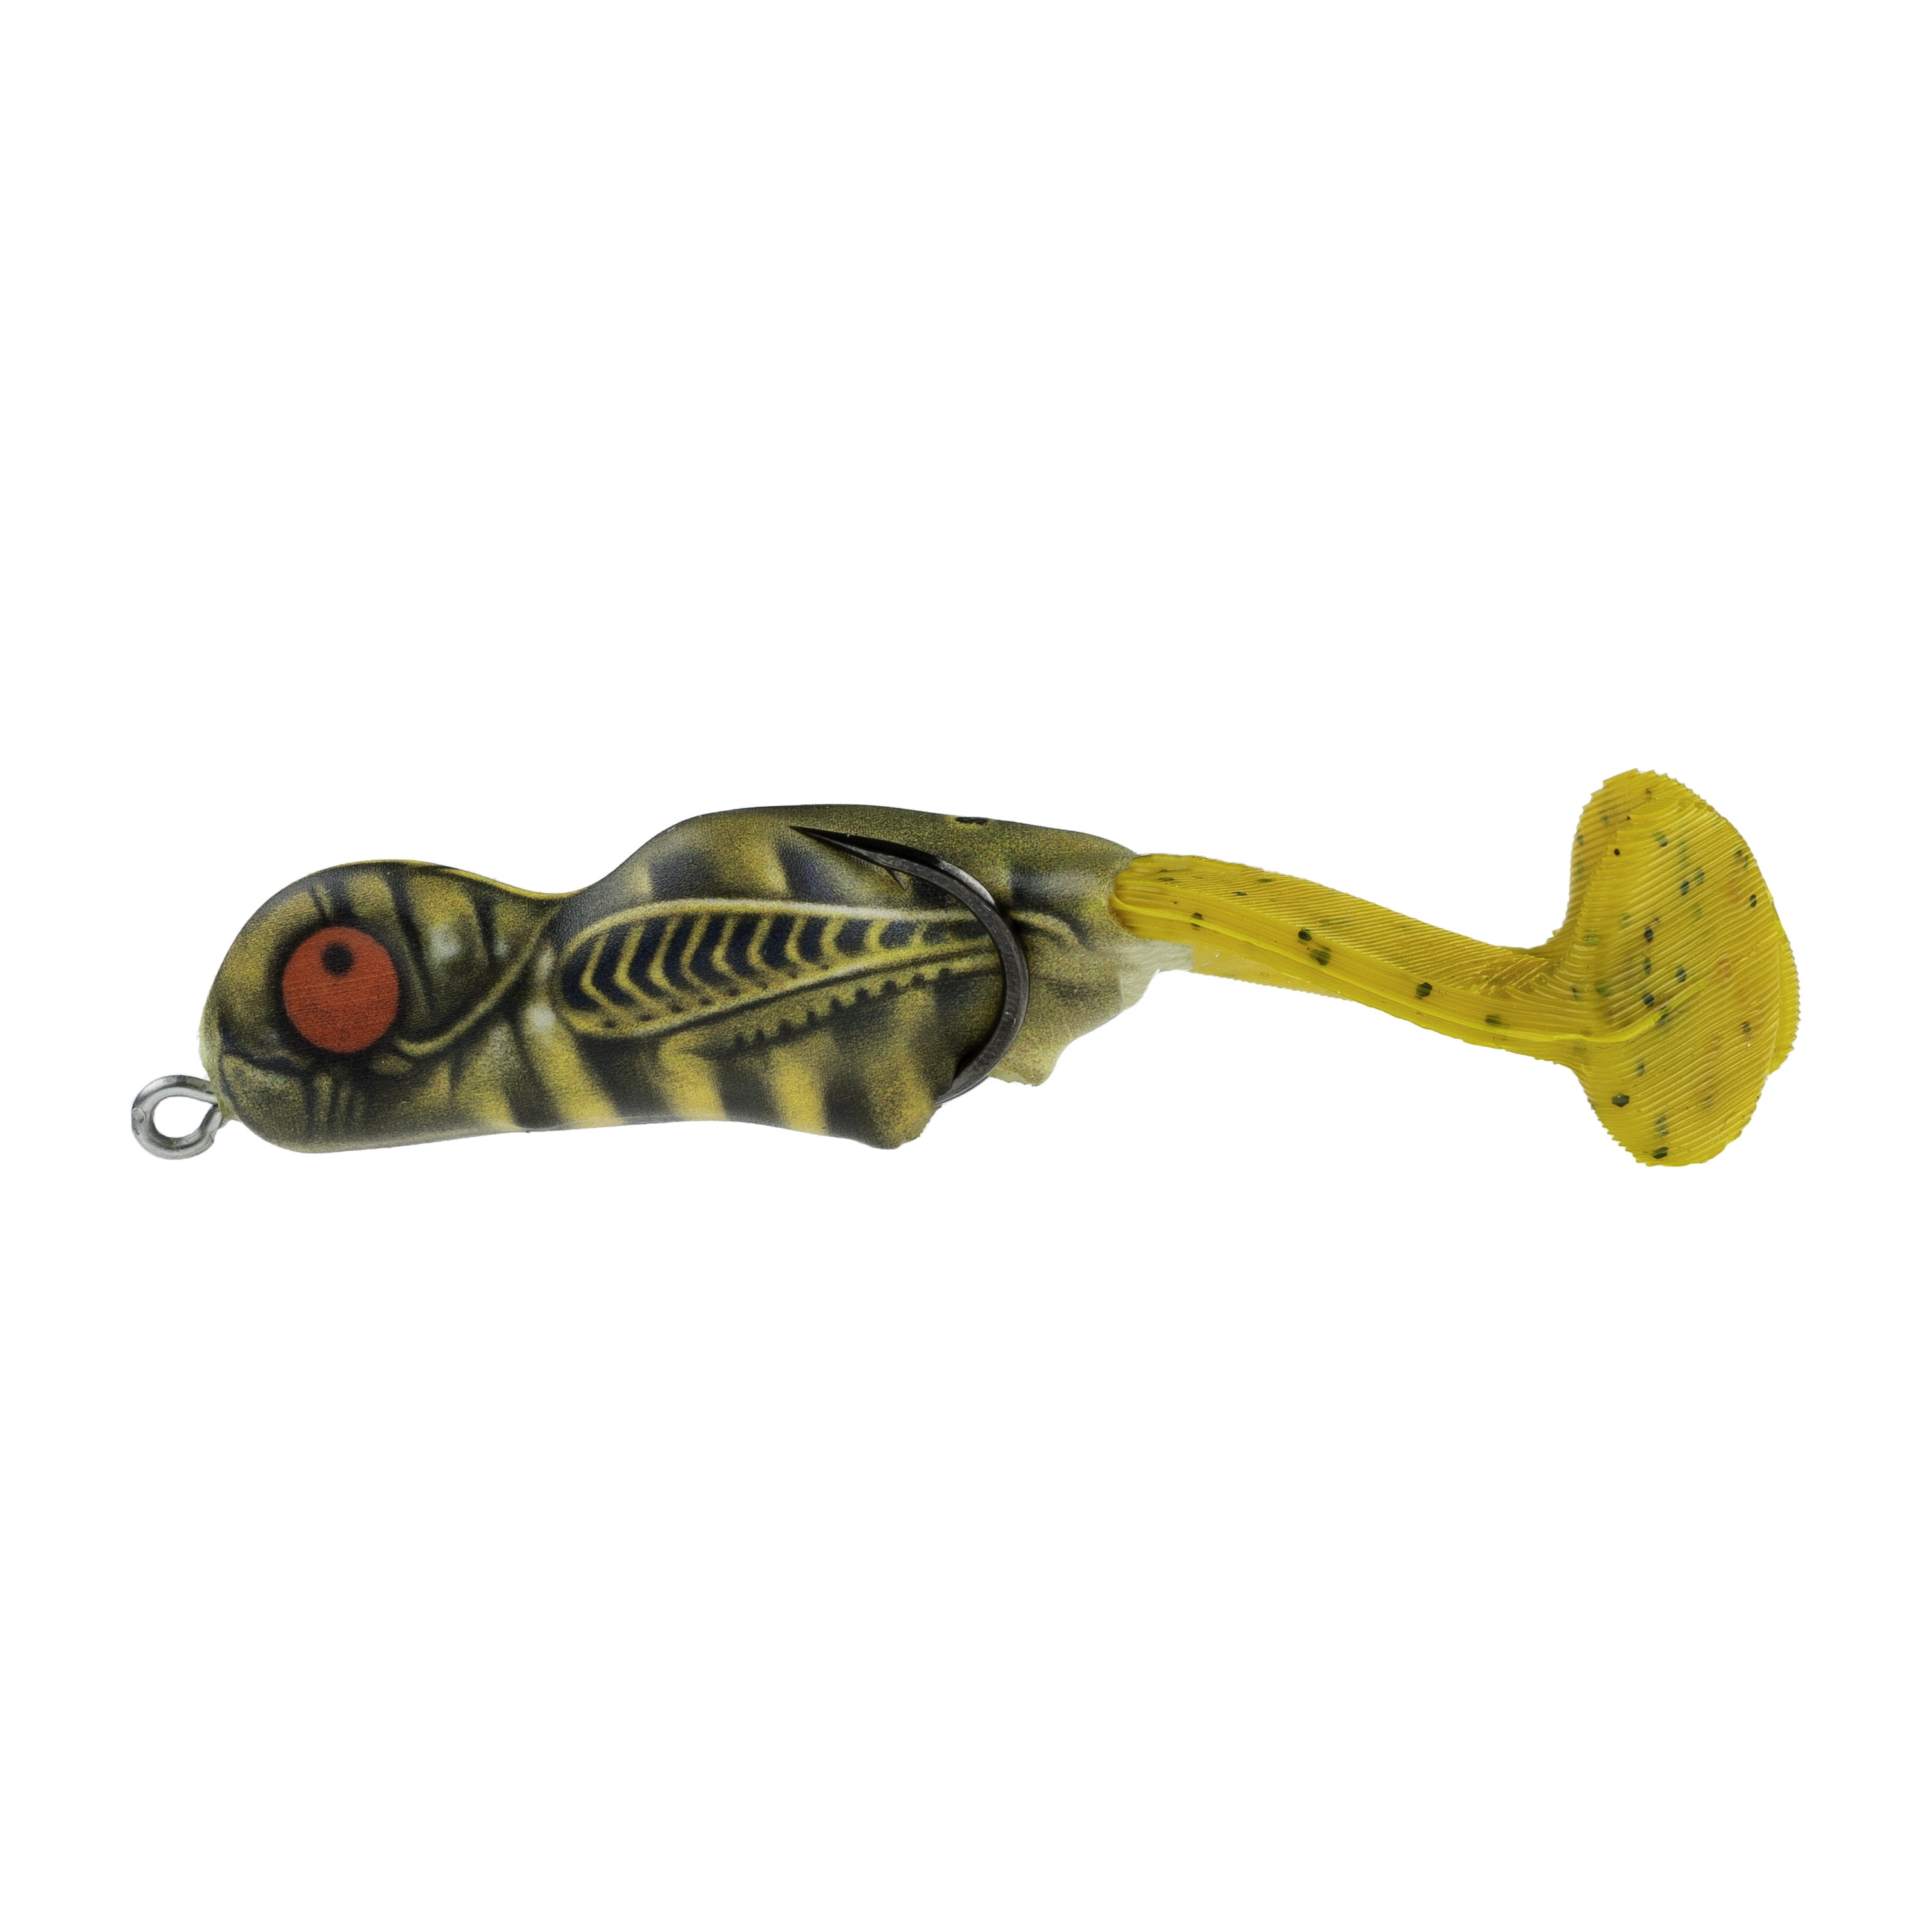 Scum Frog 3/8 oz Big Foot, Gold Grasshopper, Top Water Hollow Body Frog Lure